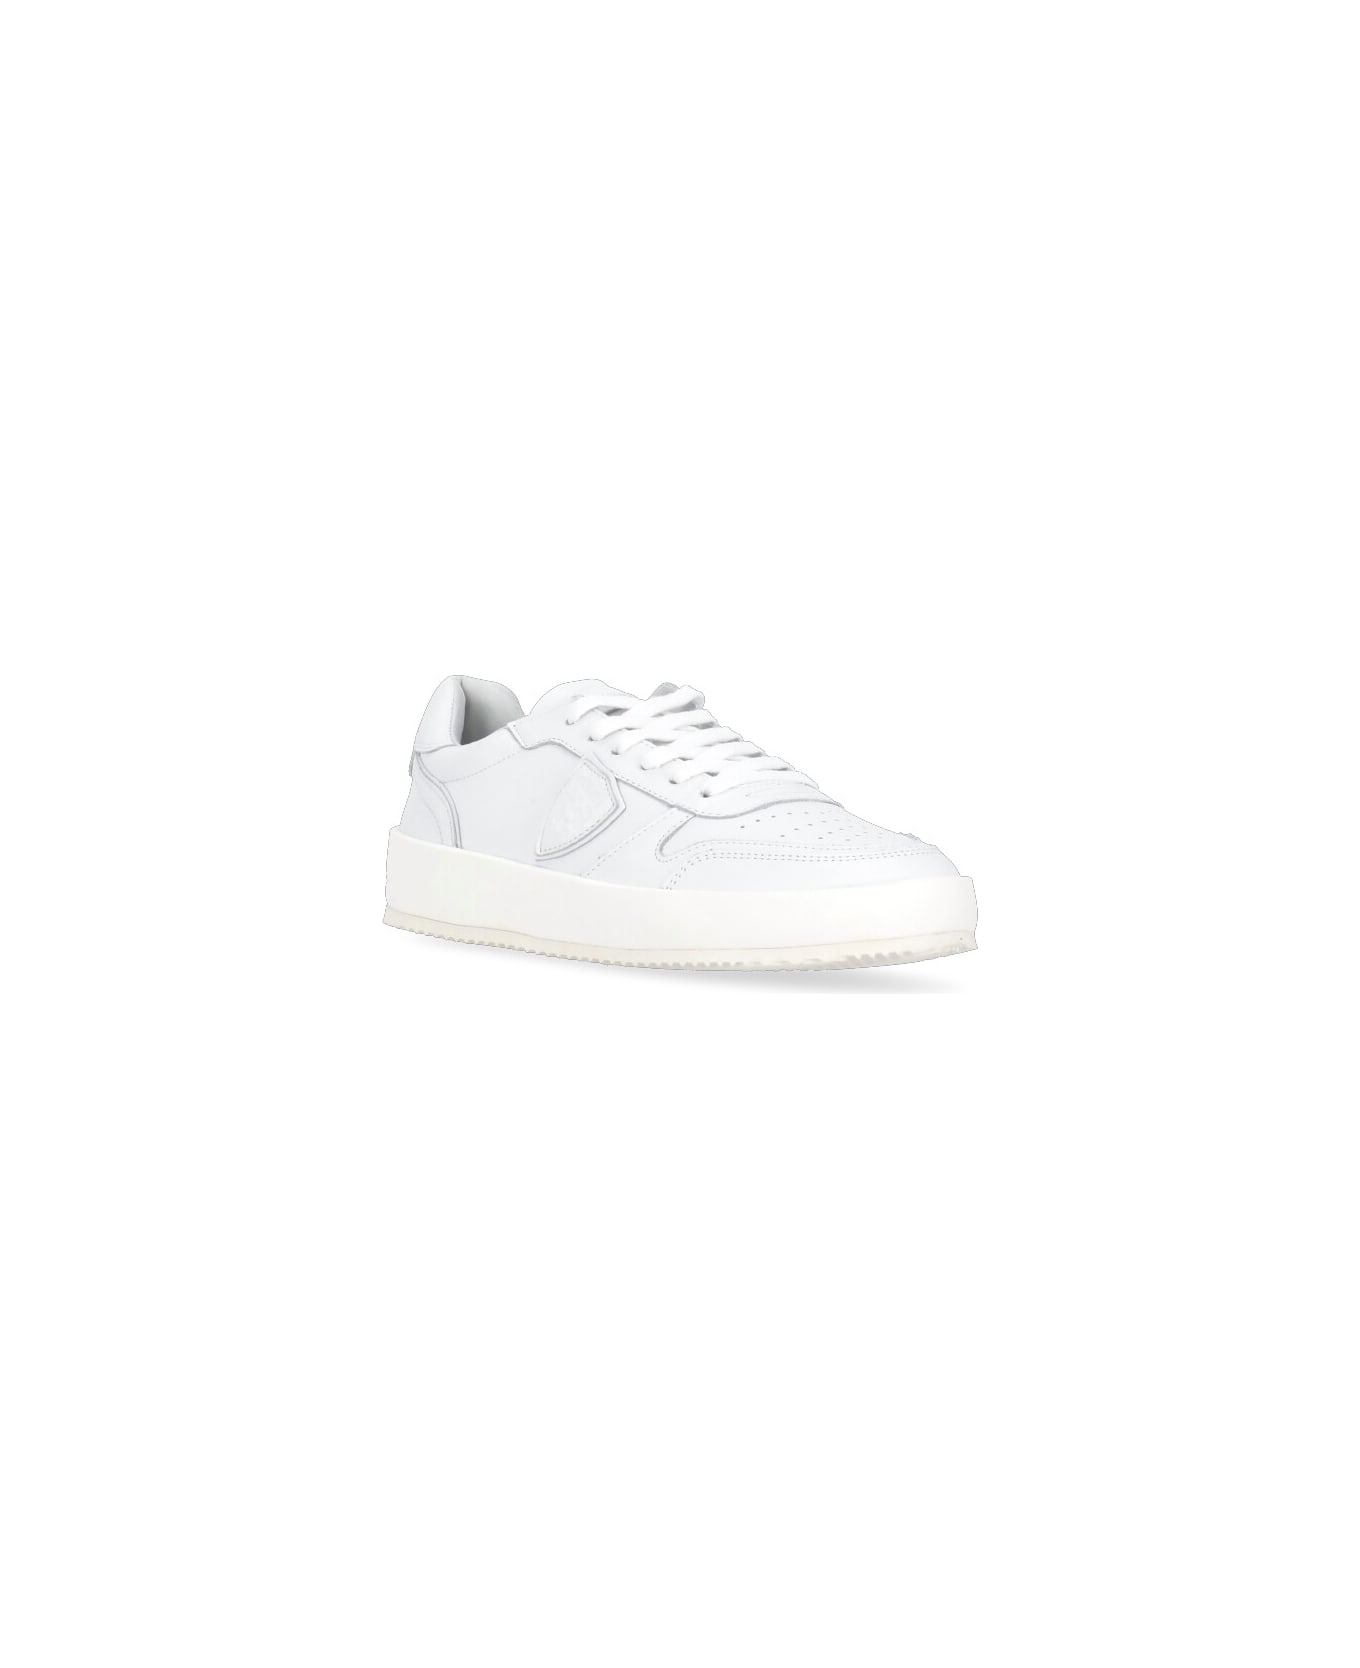 Philippe Model Nice Low Sneakers - White スニーカー